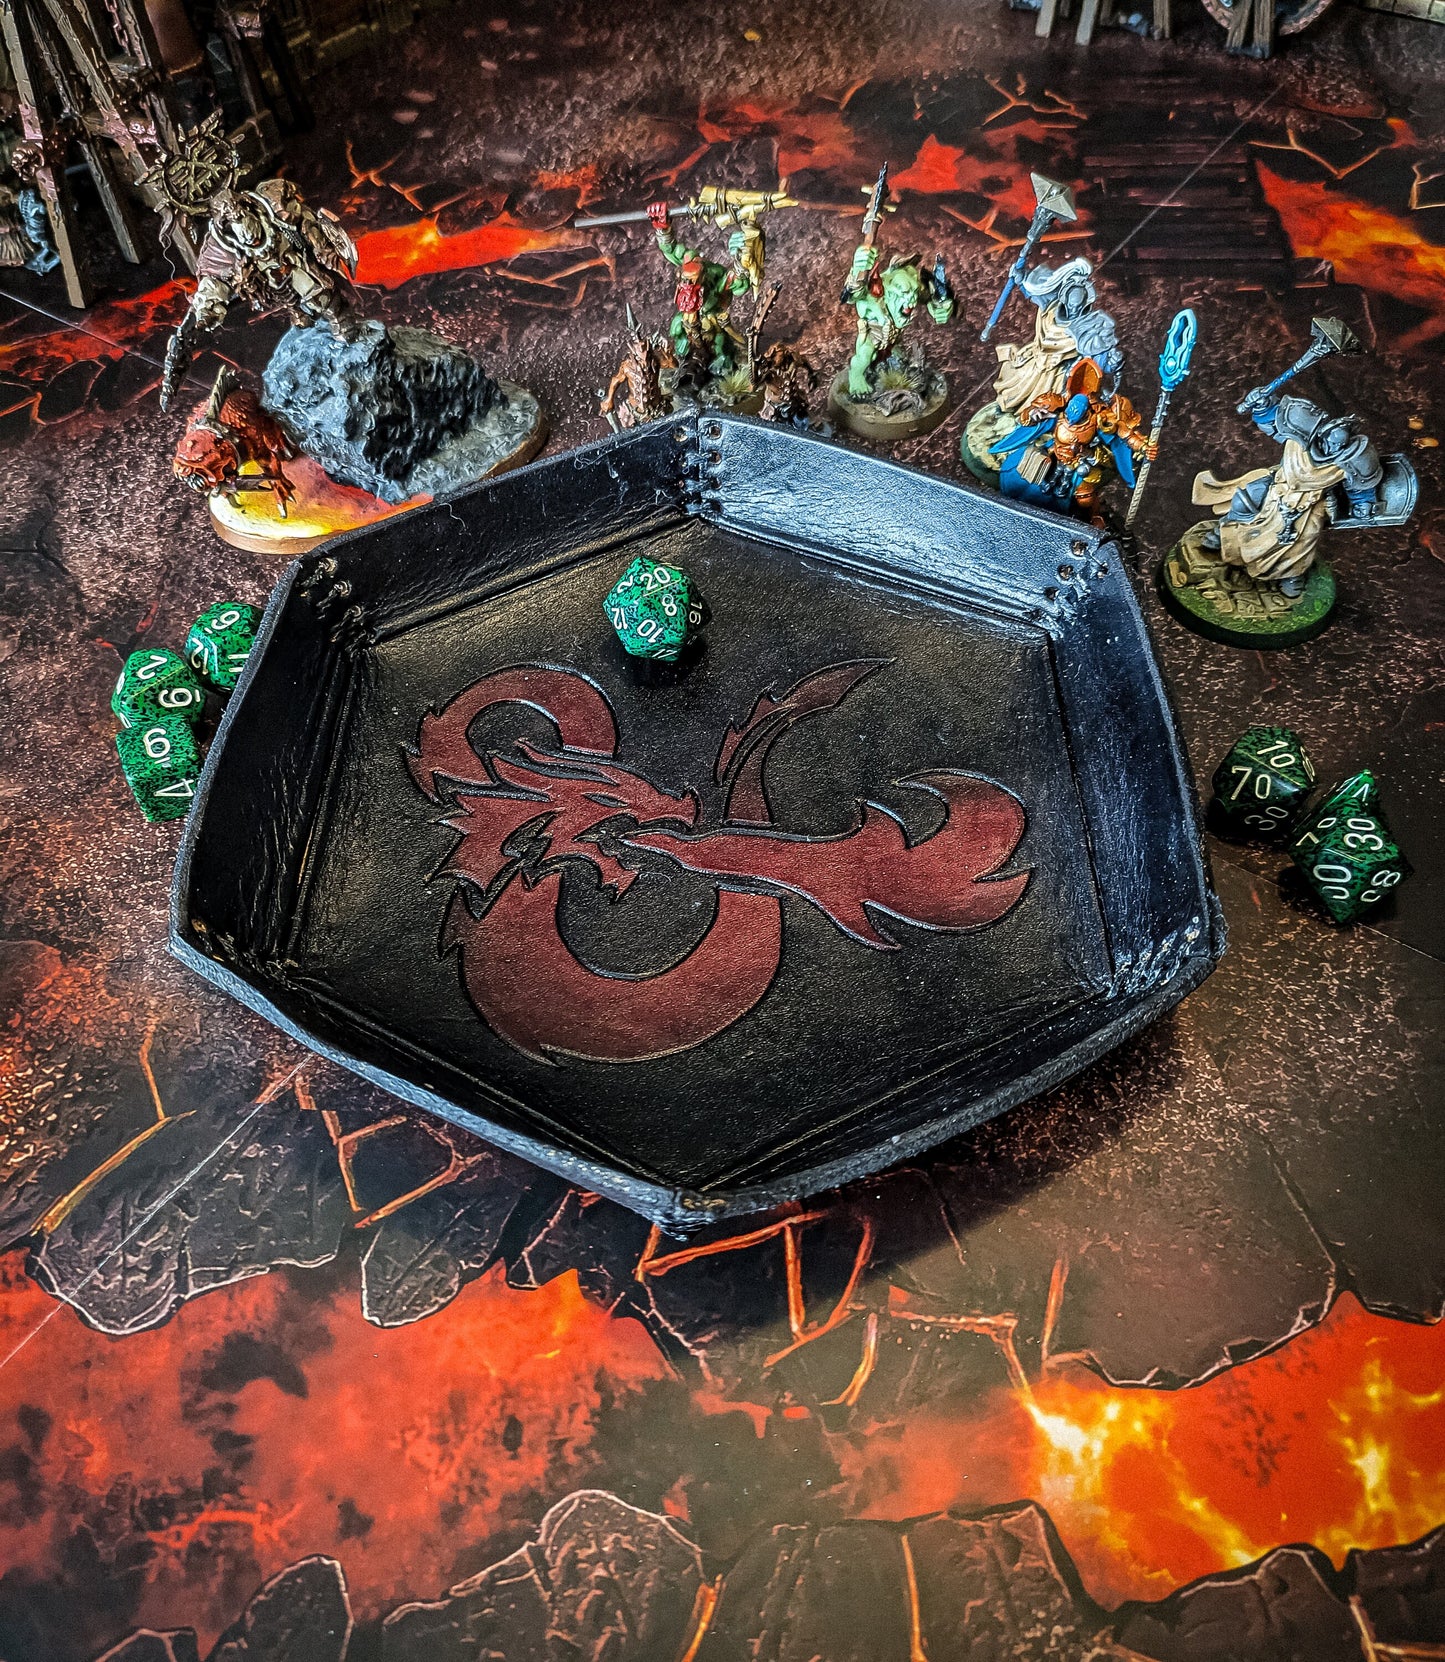 Themed Dice-roller Trays for Wargames and Tabletop